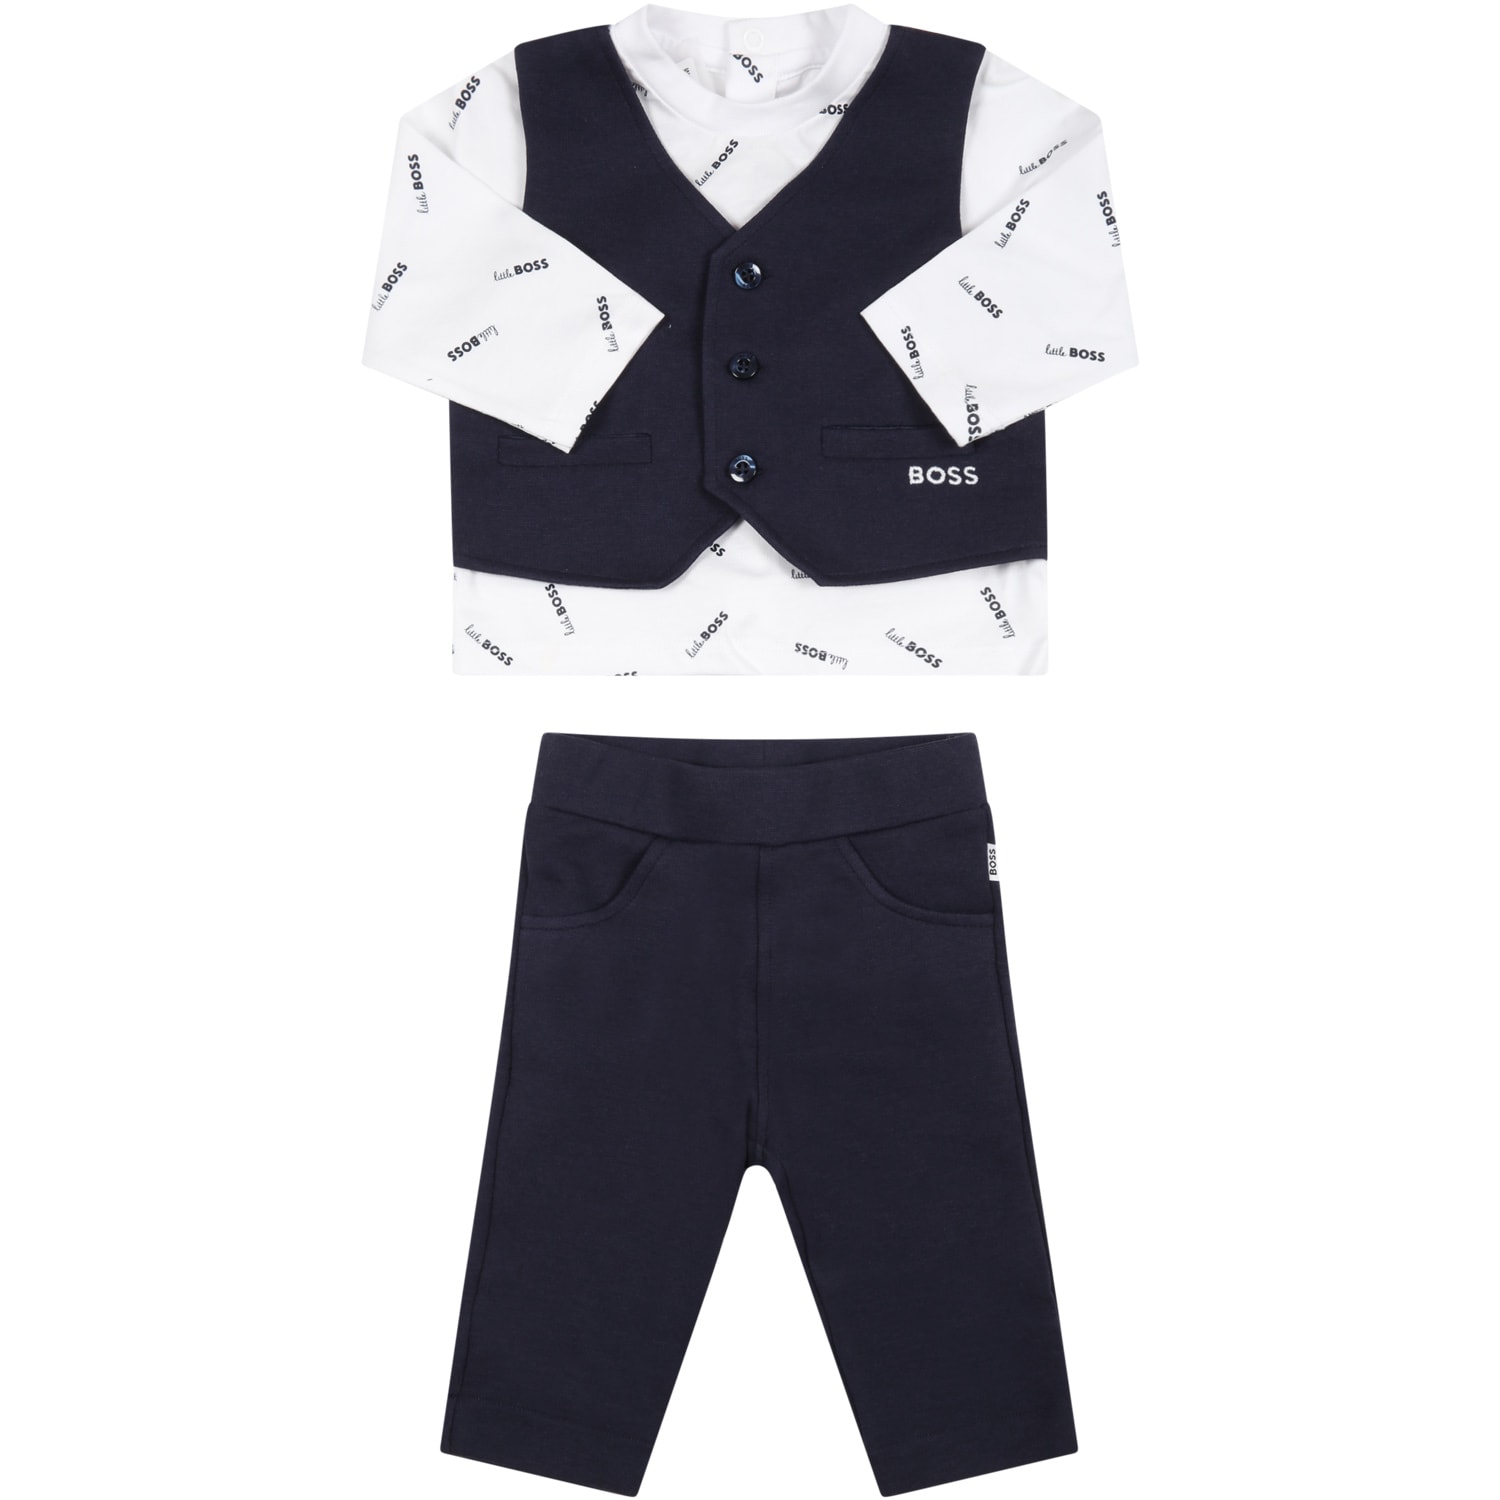 Hugo Boss Blue And White Set For Baby Boy With Logos